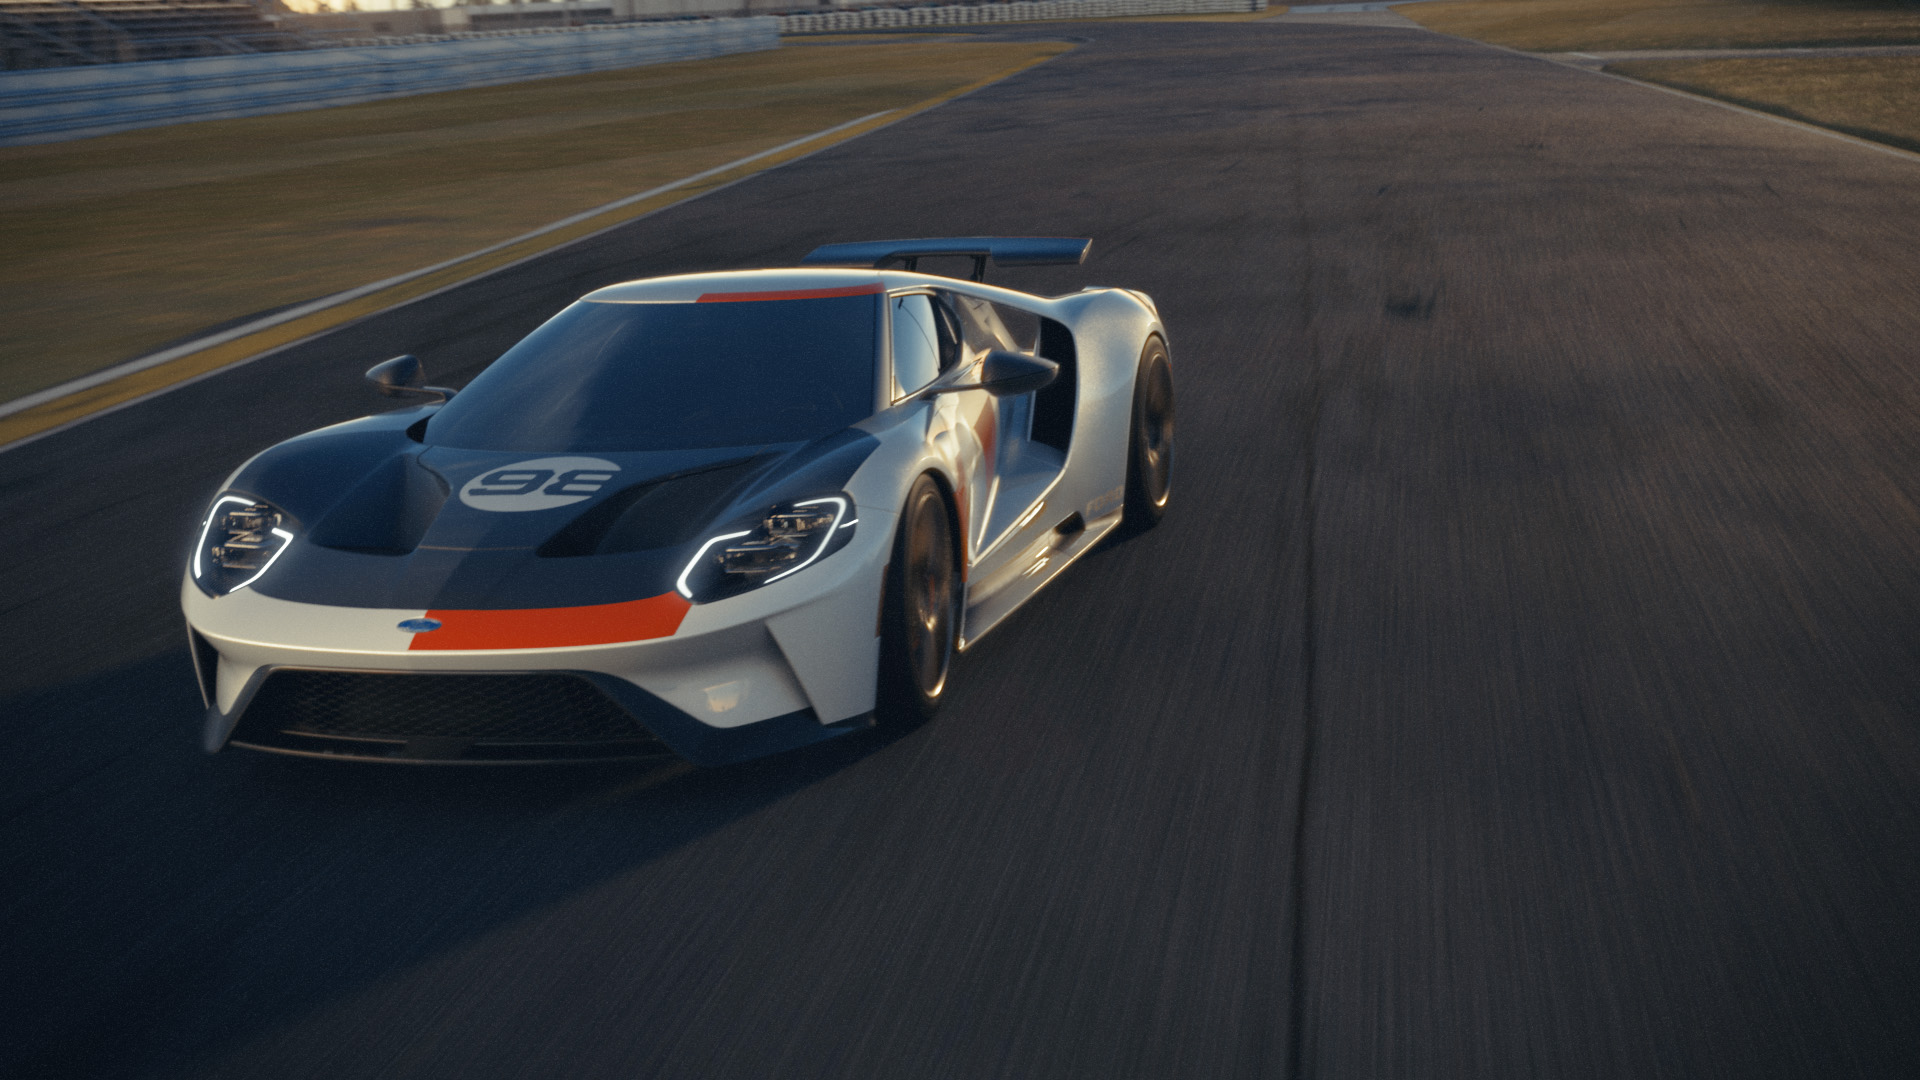 A wide view of a 2021 Ford GT in white taking a straightaway at a racetrack